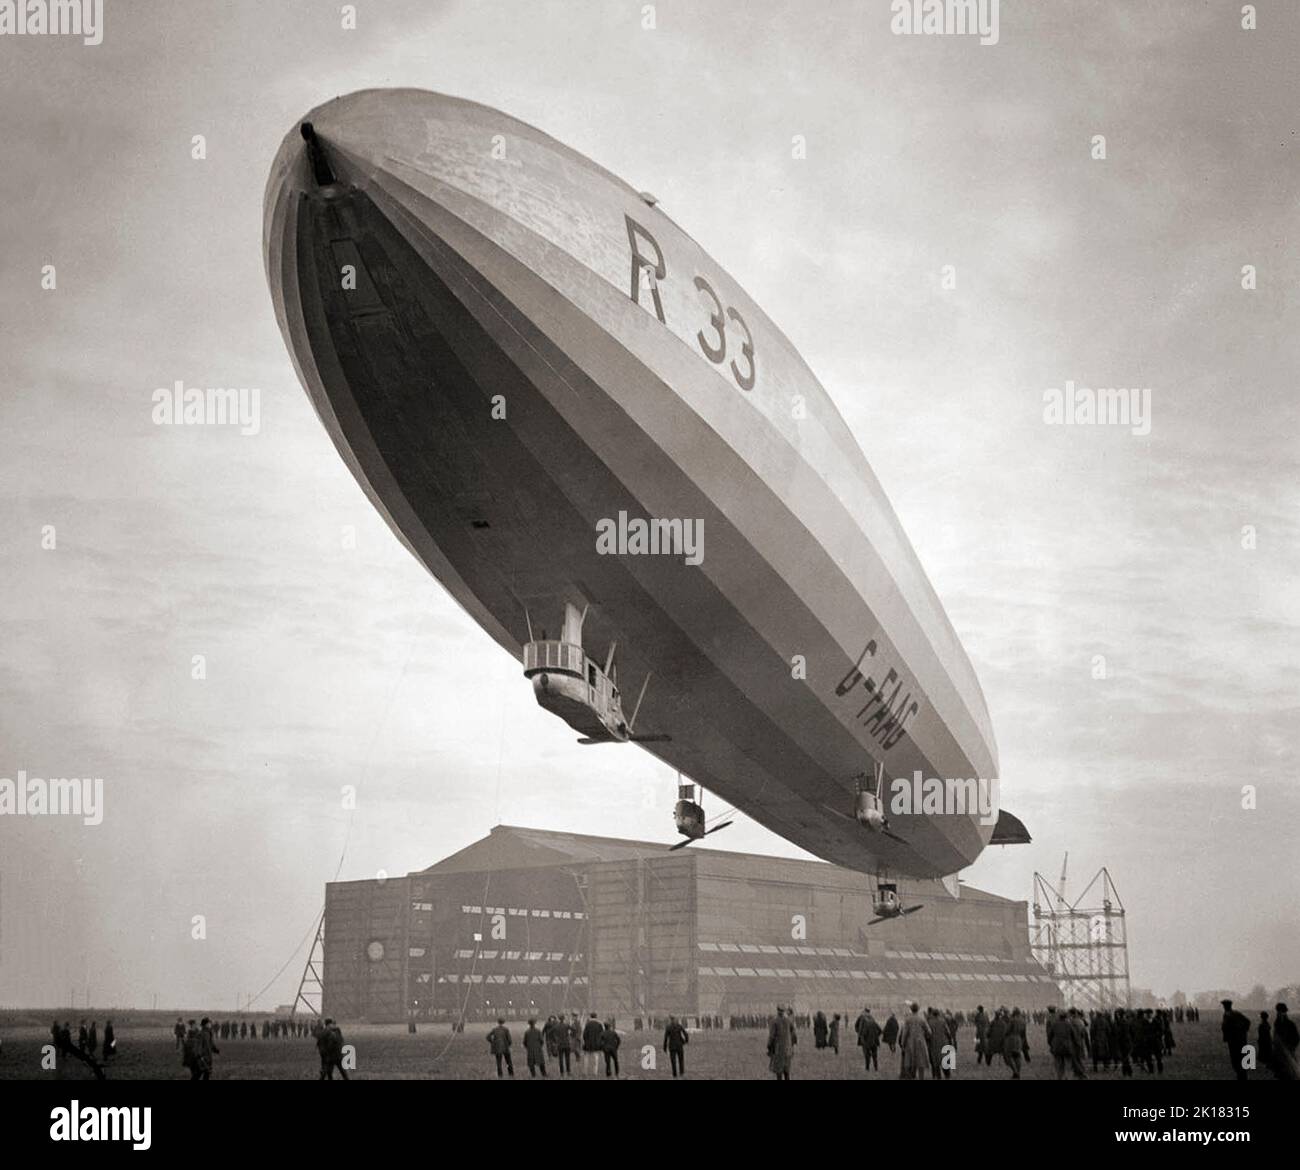 Airship R33 a British rigid airship, flying over its hanger at  RAF Pulham in Norfolk, England in 1925. The airships were built by Armstrong Whitworth for the Royal Naval Air Service during the First World War, but were not completed until after the end of hostilities, by which time the RNAS had become part of the Royal Air Force. Her first flight was in early 1919 then sent to Pulham airship station she clocked up over 300 flying hours in tests and the training of crew. Stock Photo